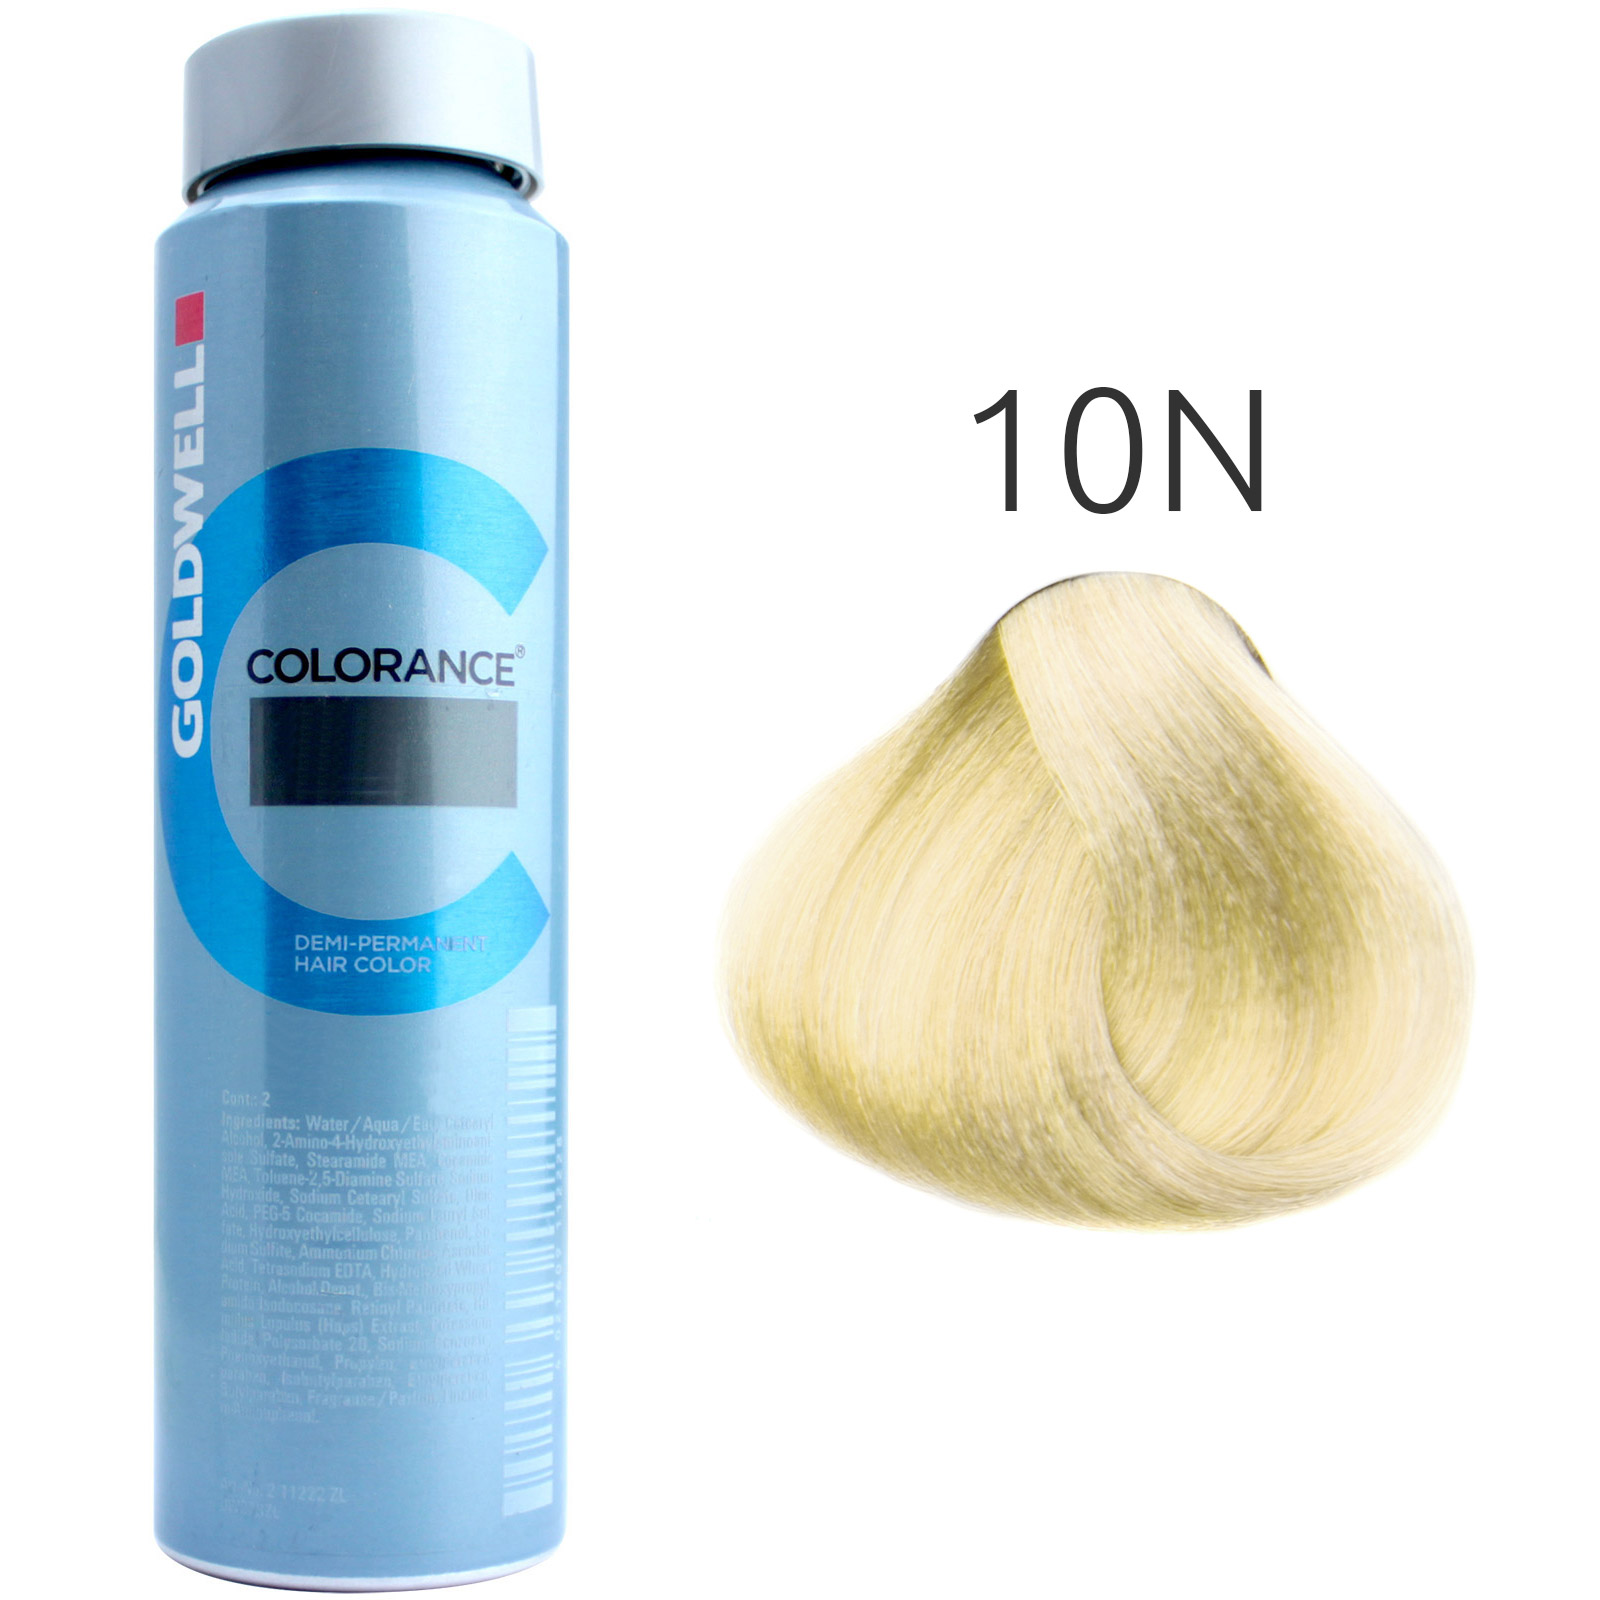 Goldwell Colorance 10